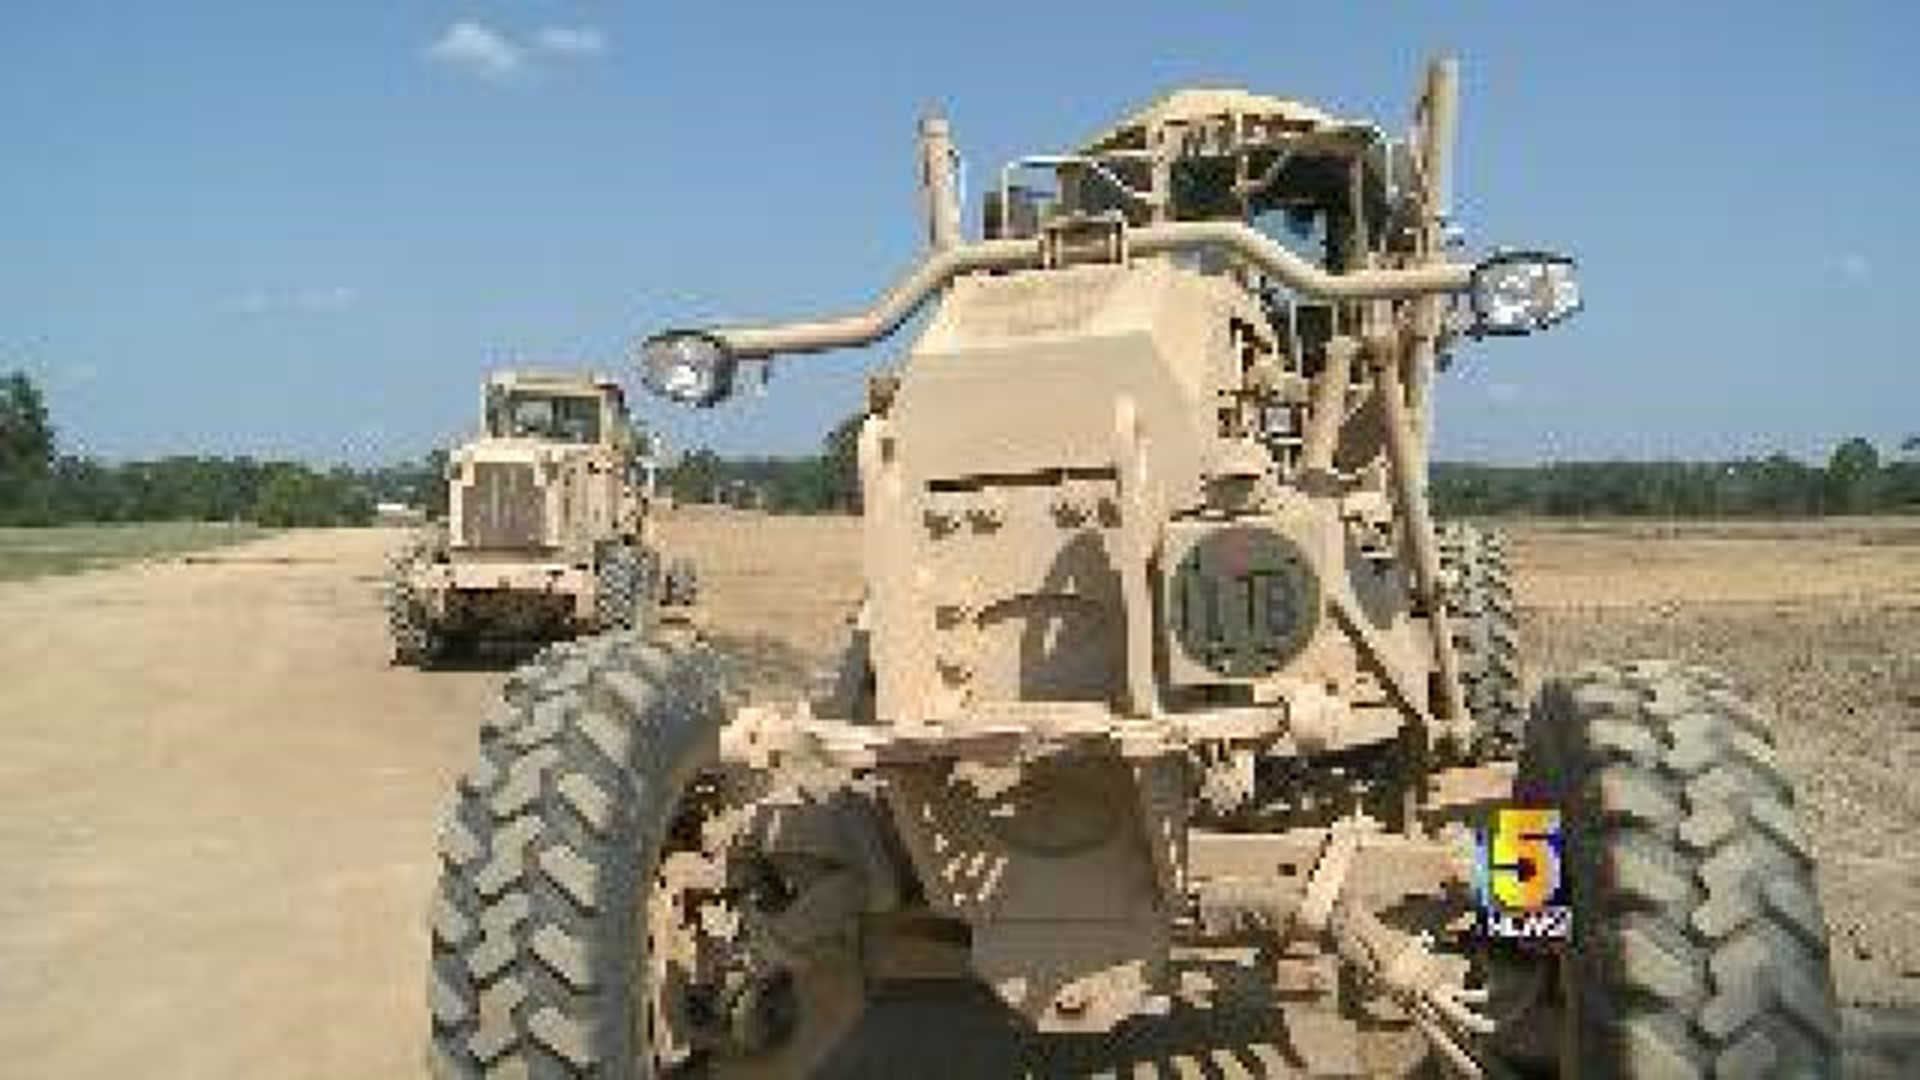 Army Reserve Members Help Prepare Ground To House Future Sports Complex